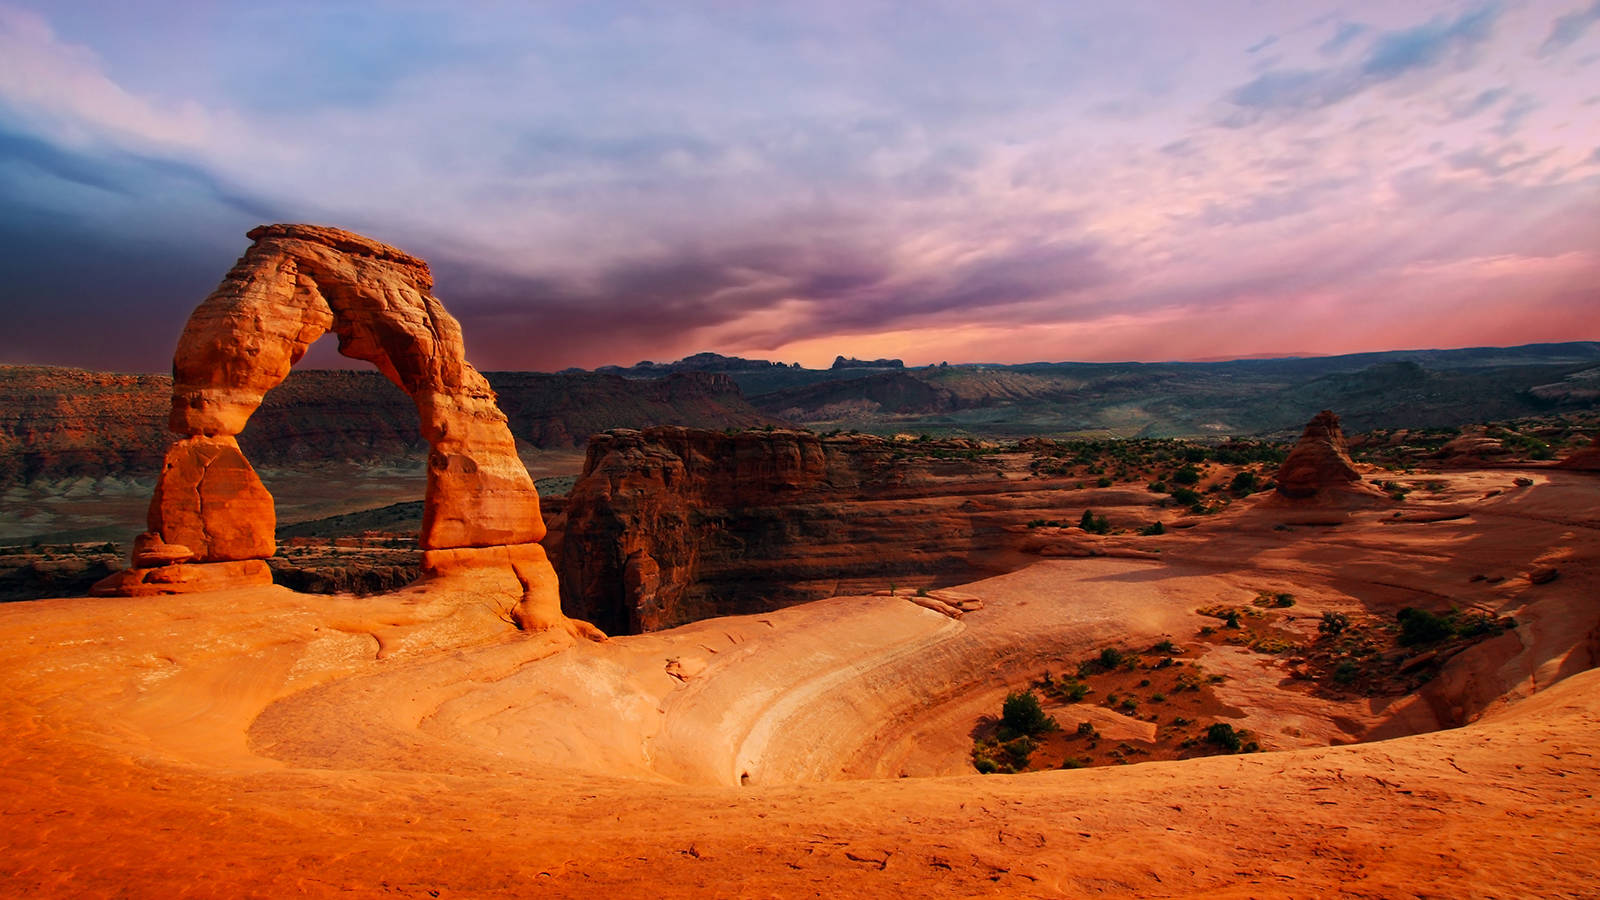 View the Scenic Southwest Texas Canyonlands from the Pecos River